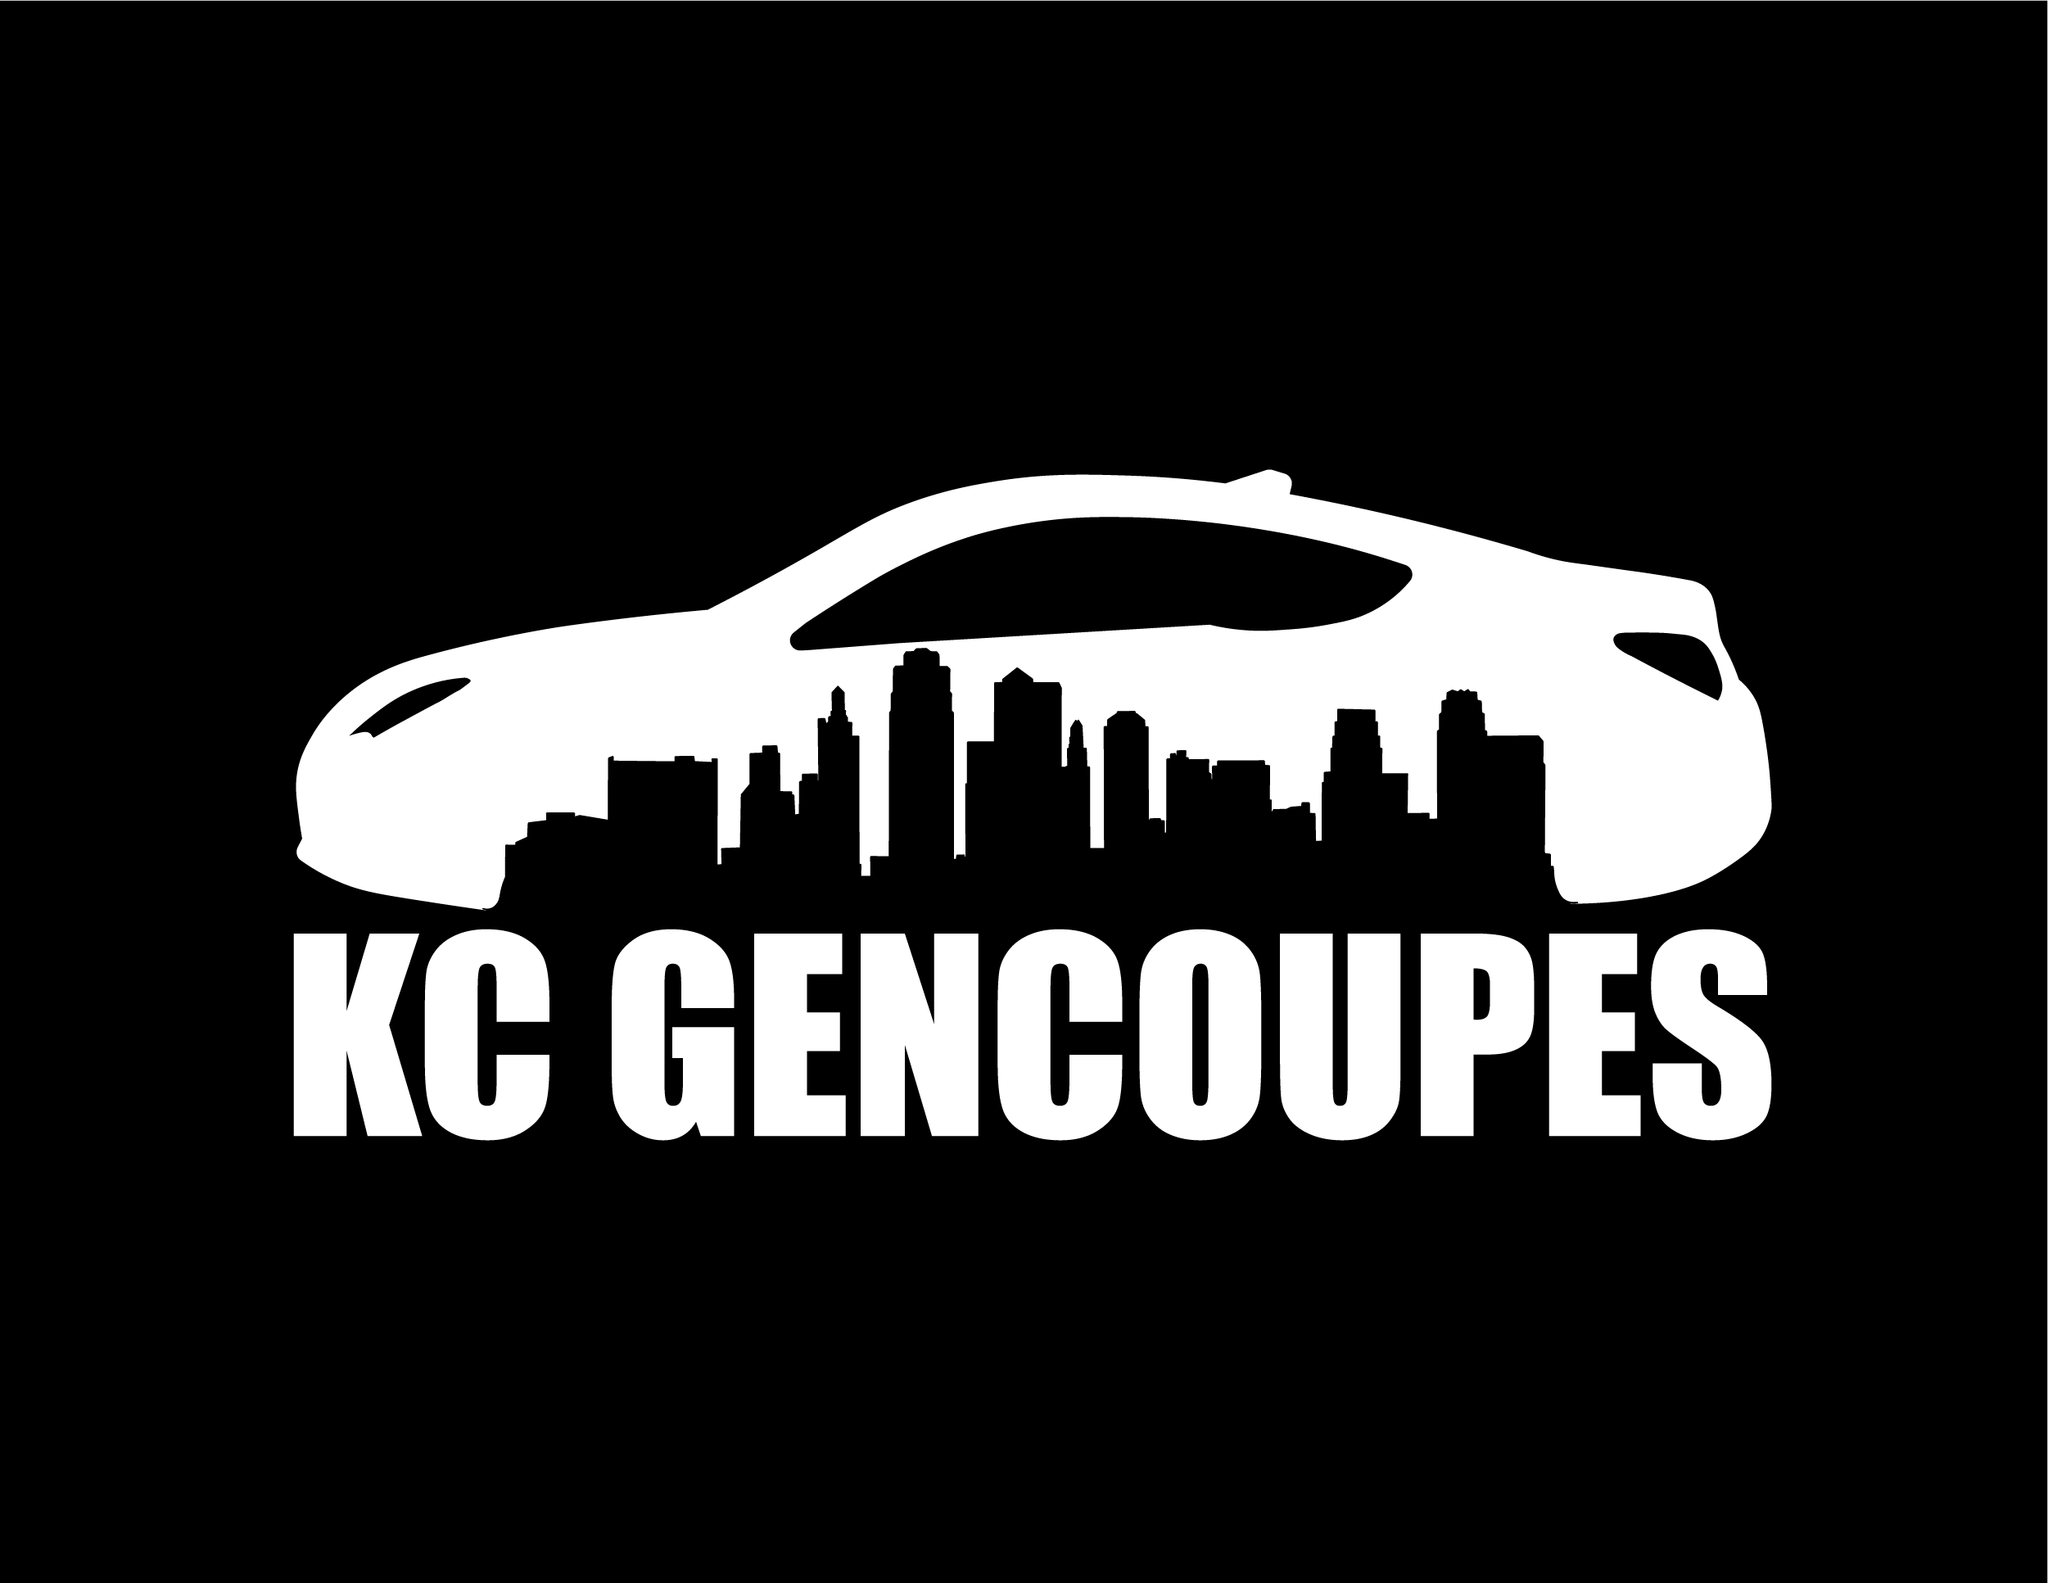 KC GenCoupes Decal